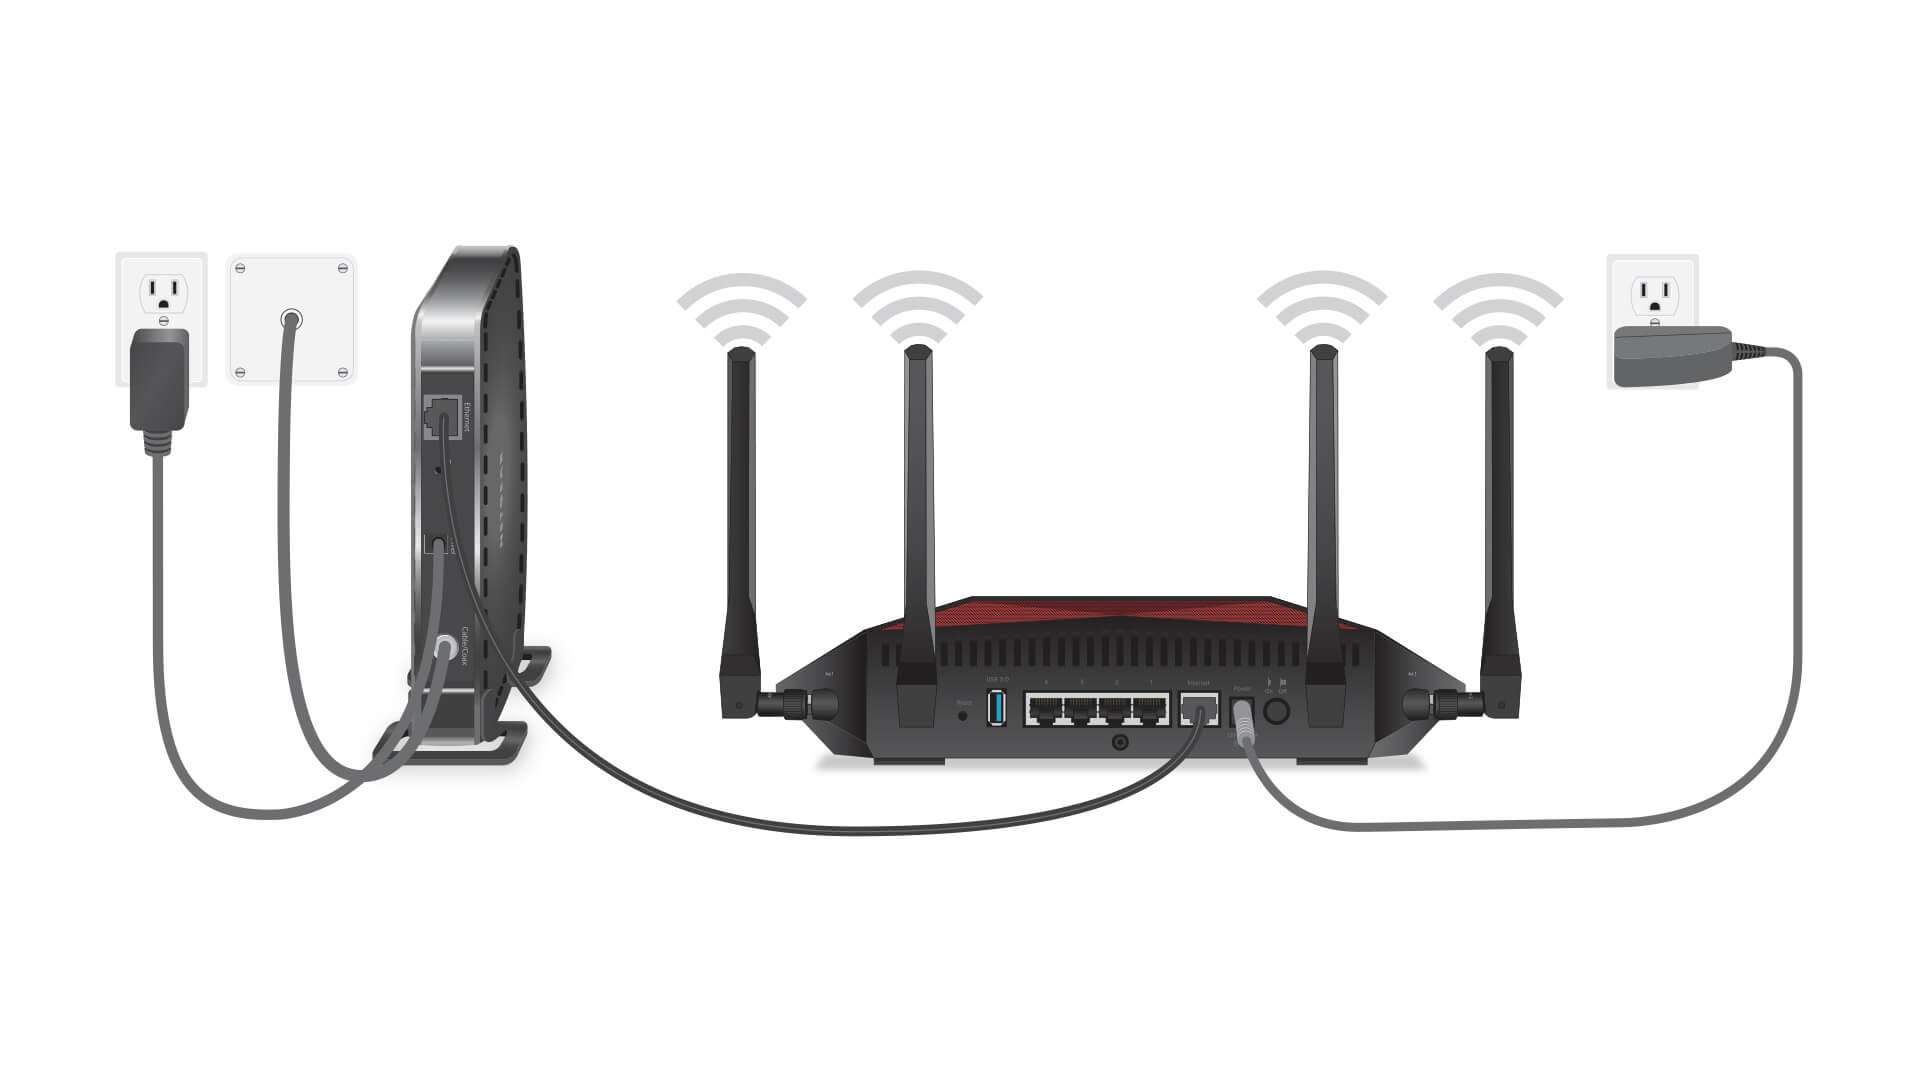 Connect your router to power it up